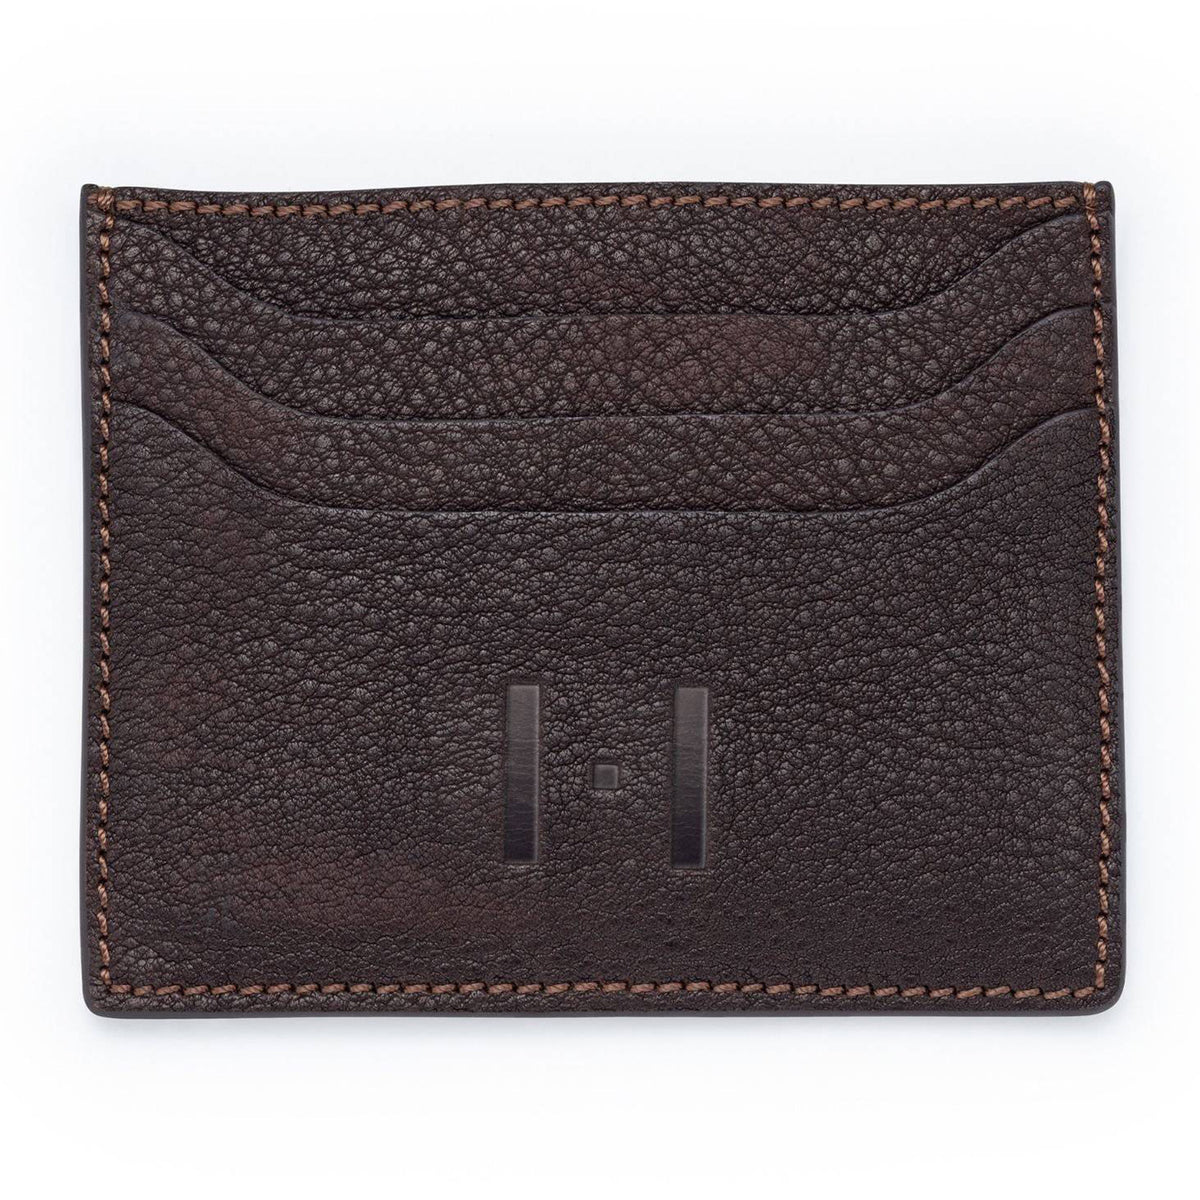 Hand-sewn card case made from genuine certified organic leather